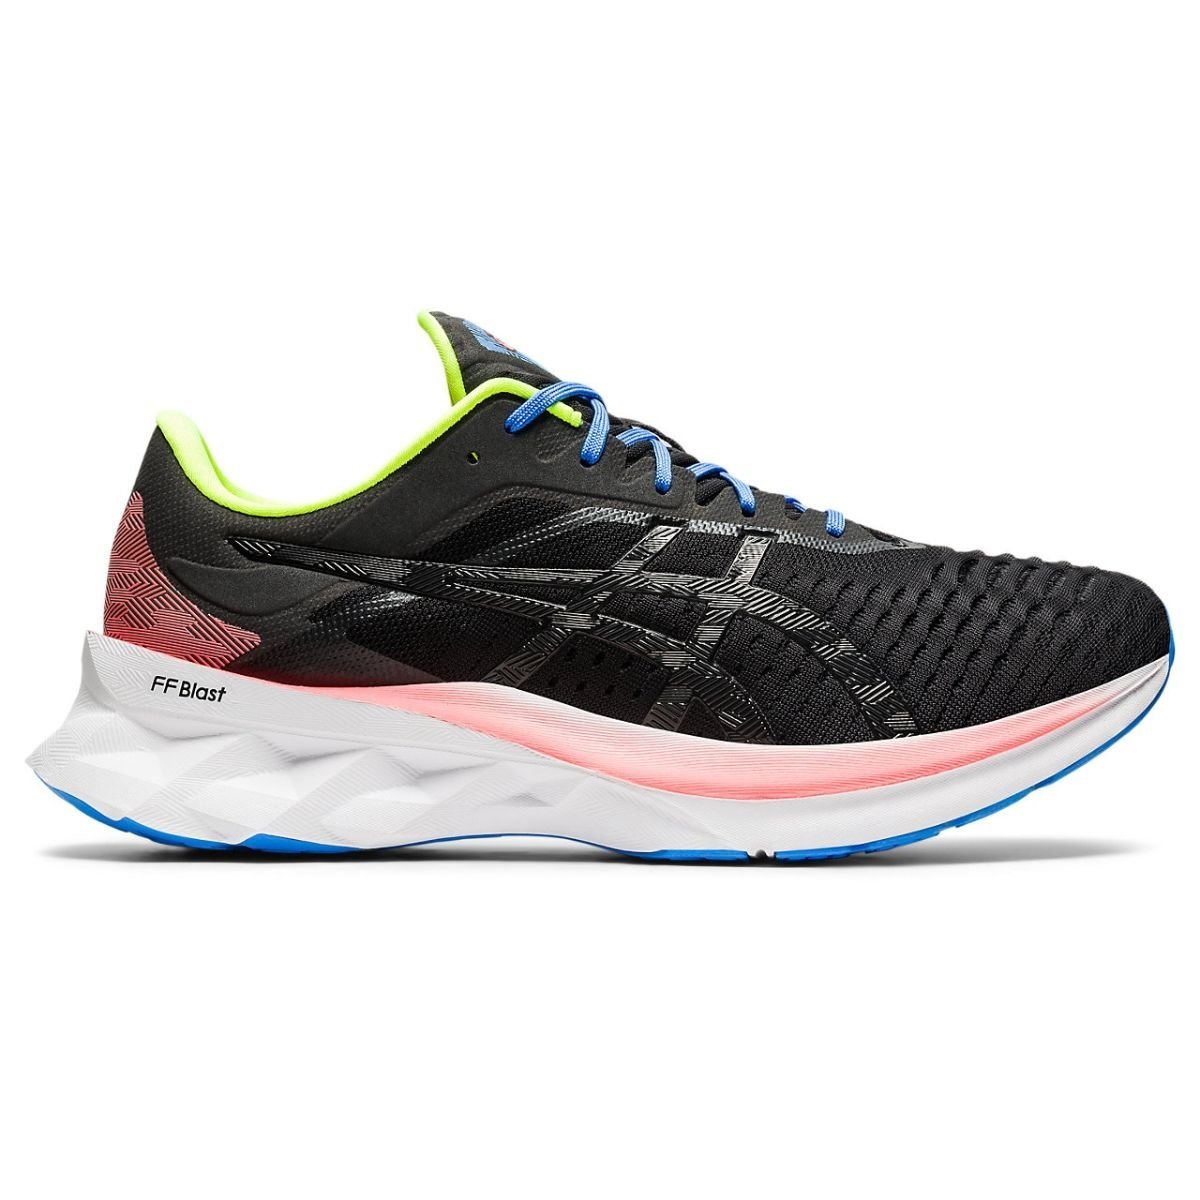 asics shoes neutral runners